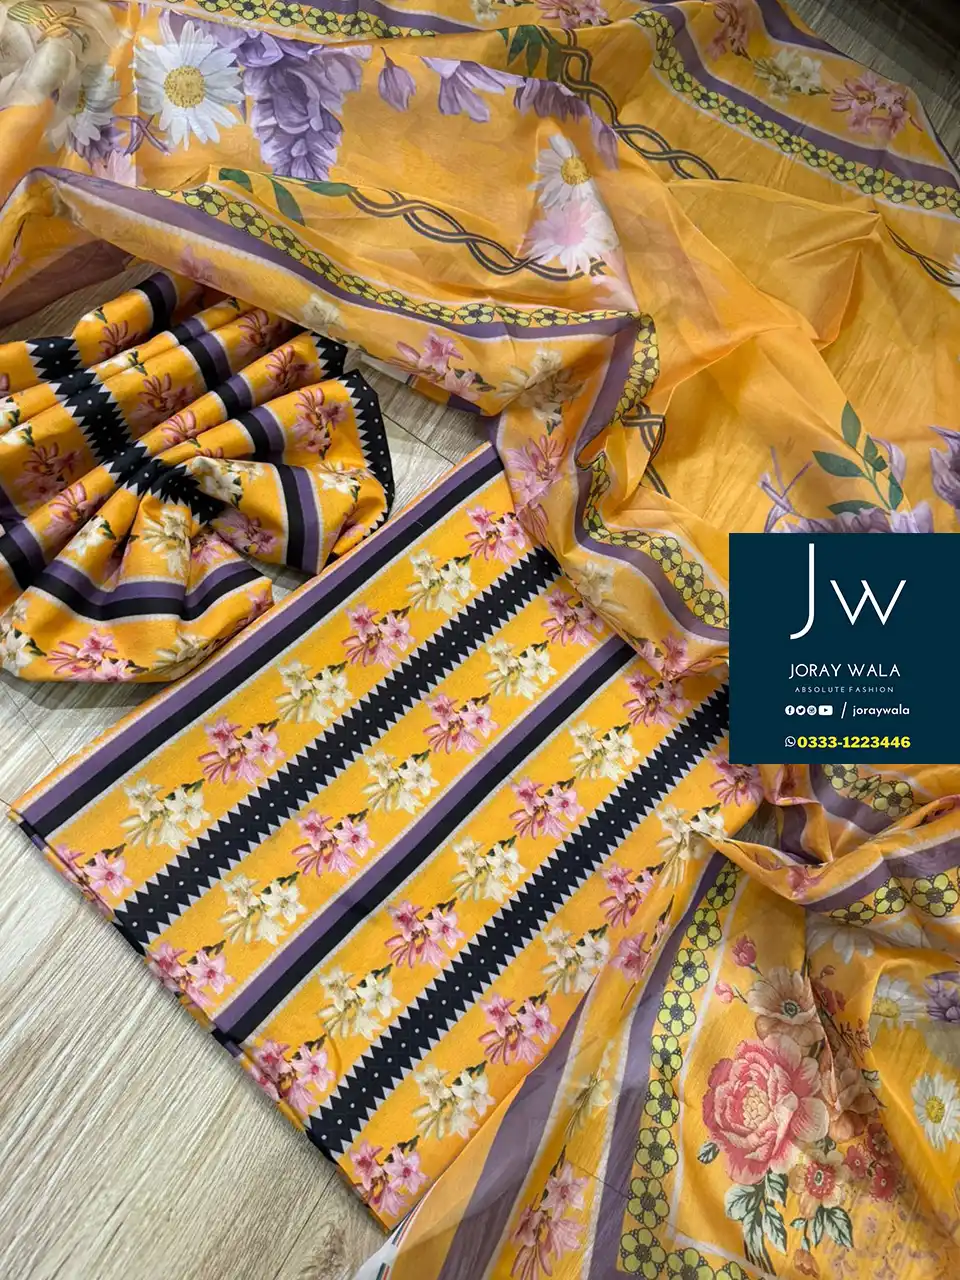 Digital Printed Swiss lawn with silk dupatta D33 available at joraywala with free delivery